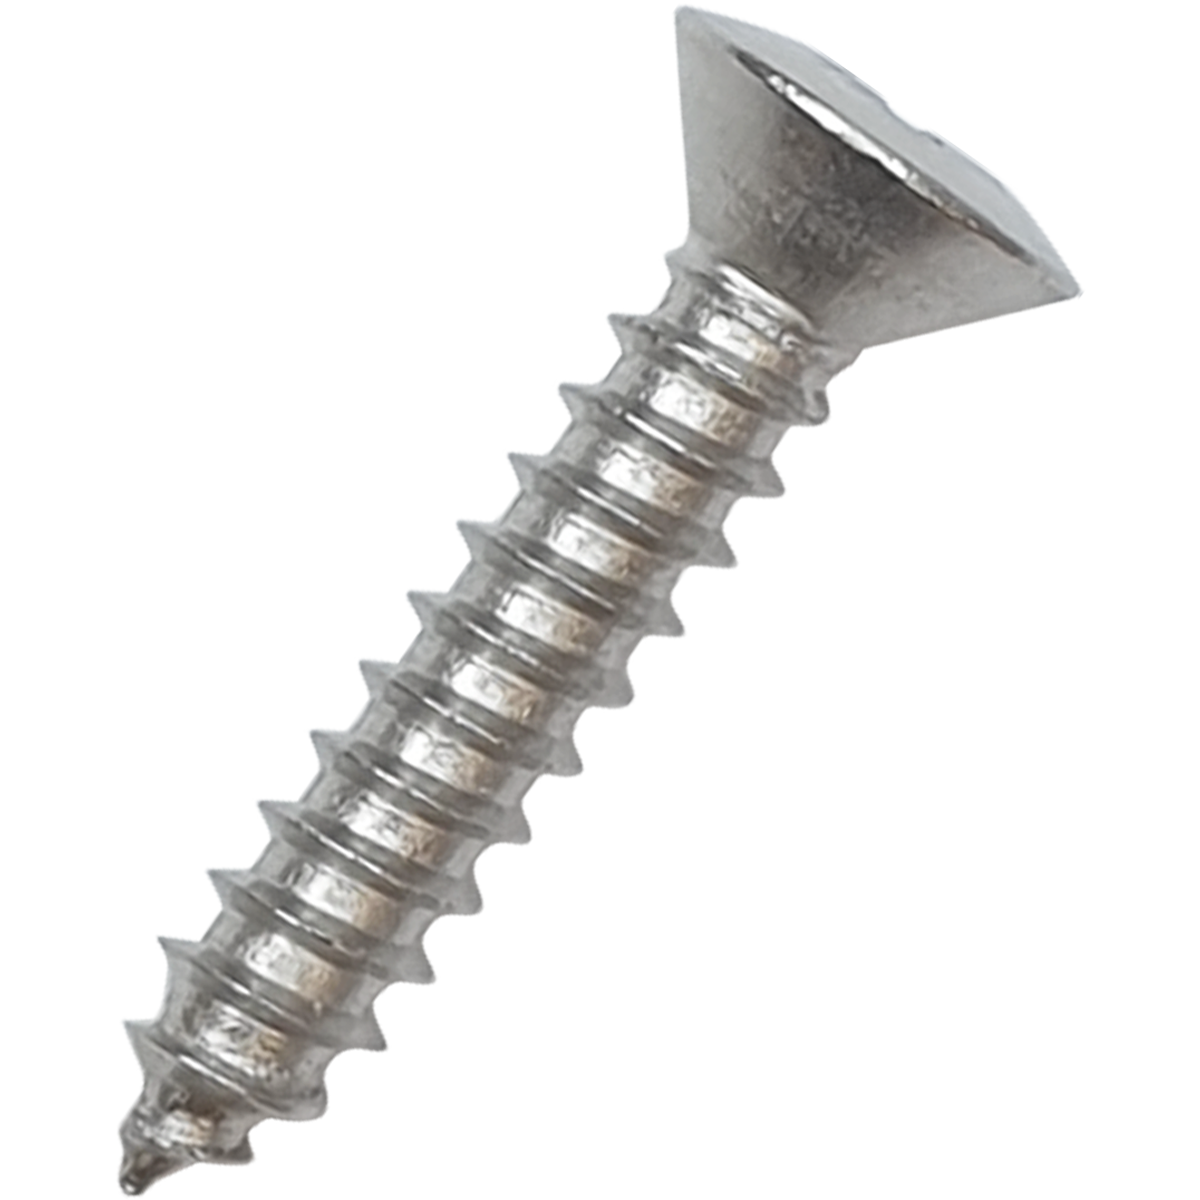 Raised, countersunk self-tapping screws at affordable prices.